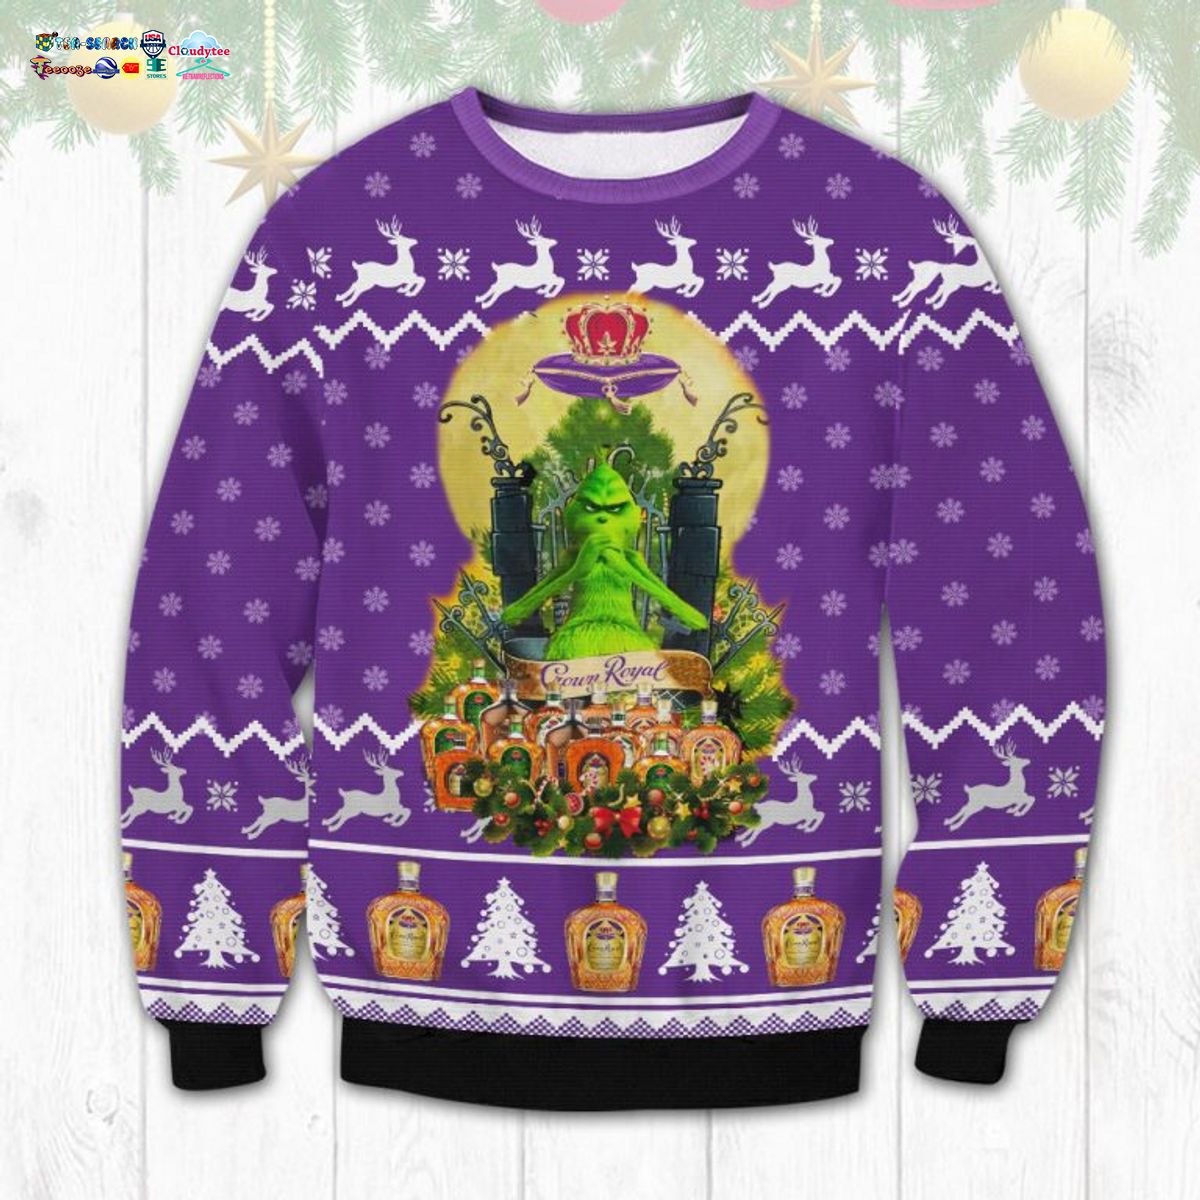 Grinch Crown Royal Ugly Christmas Sweater